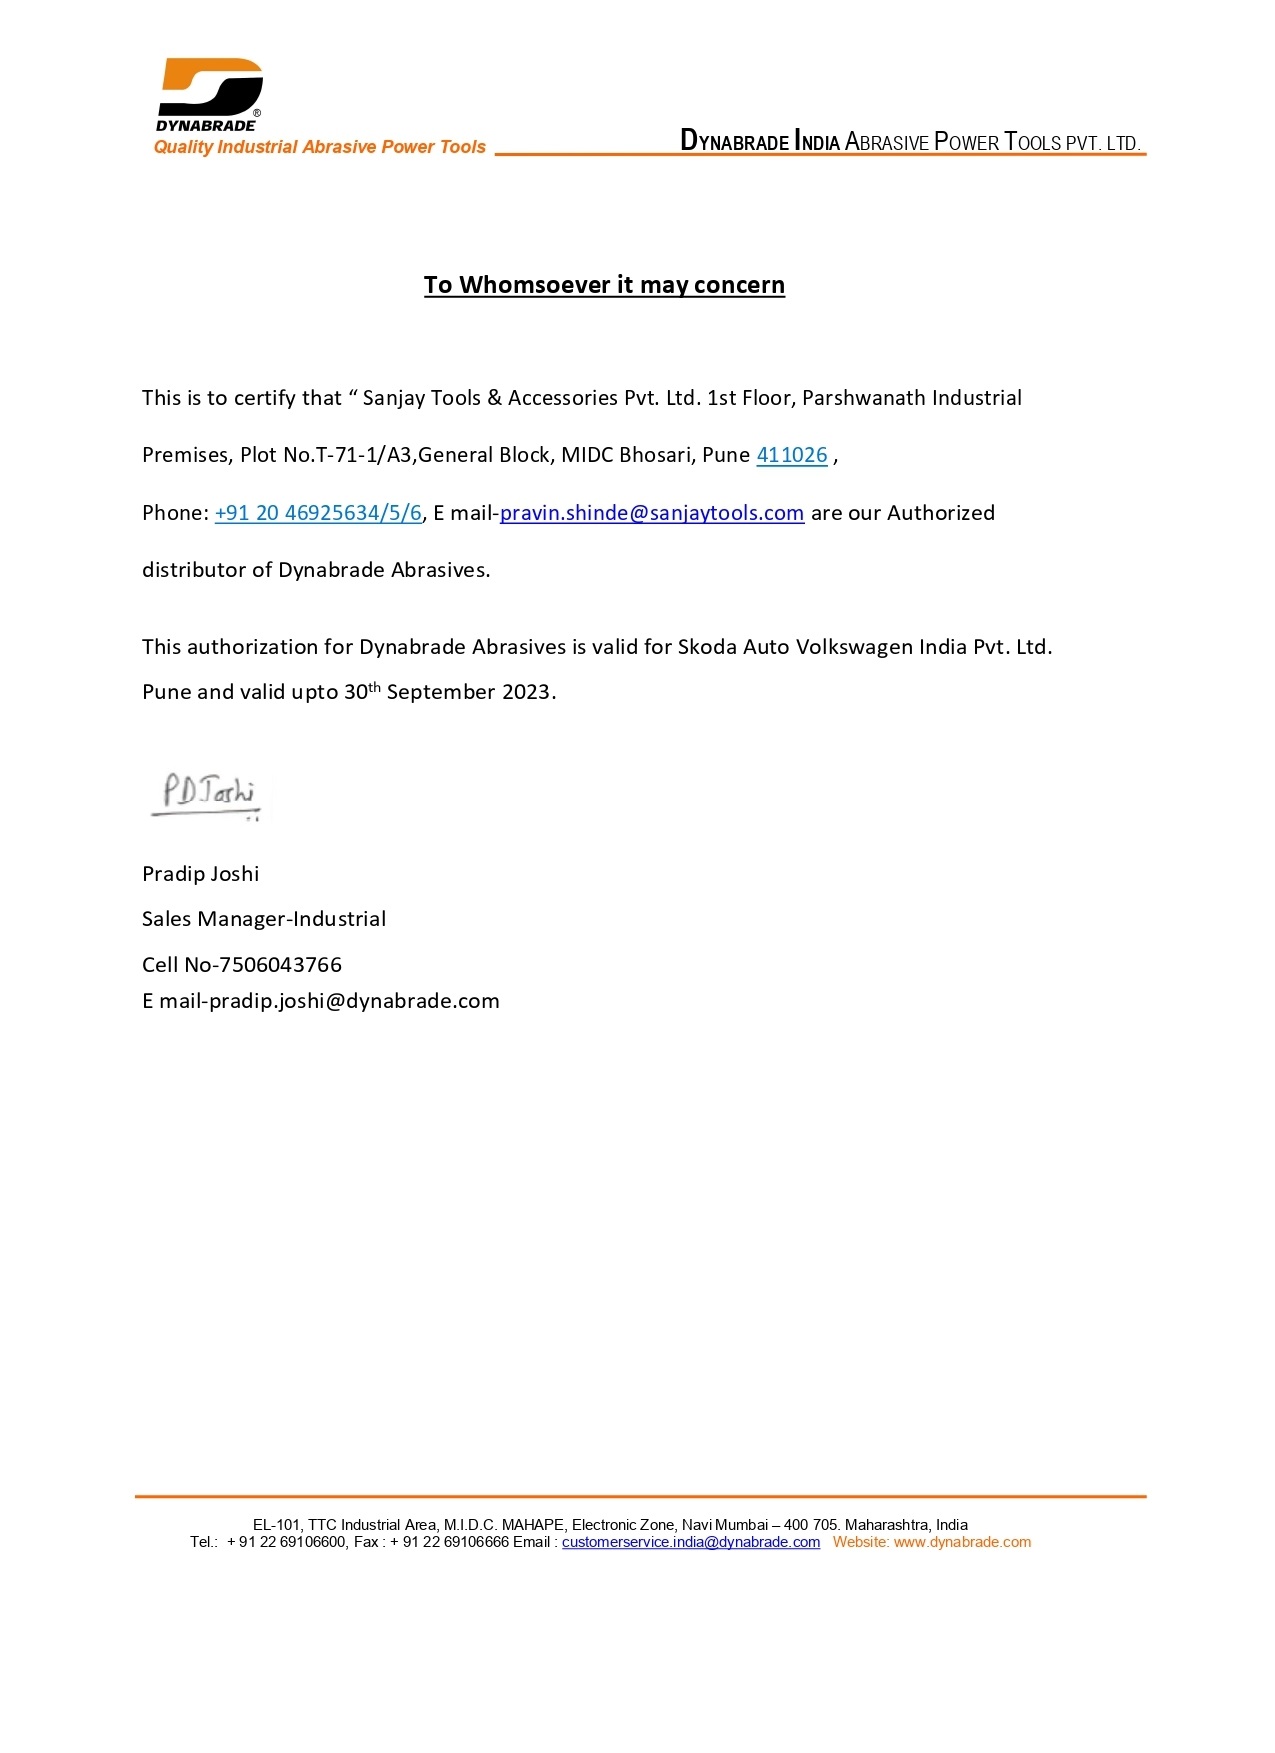 Dynabrade Authorization Letter